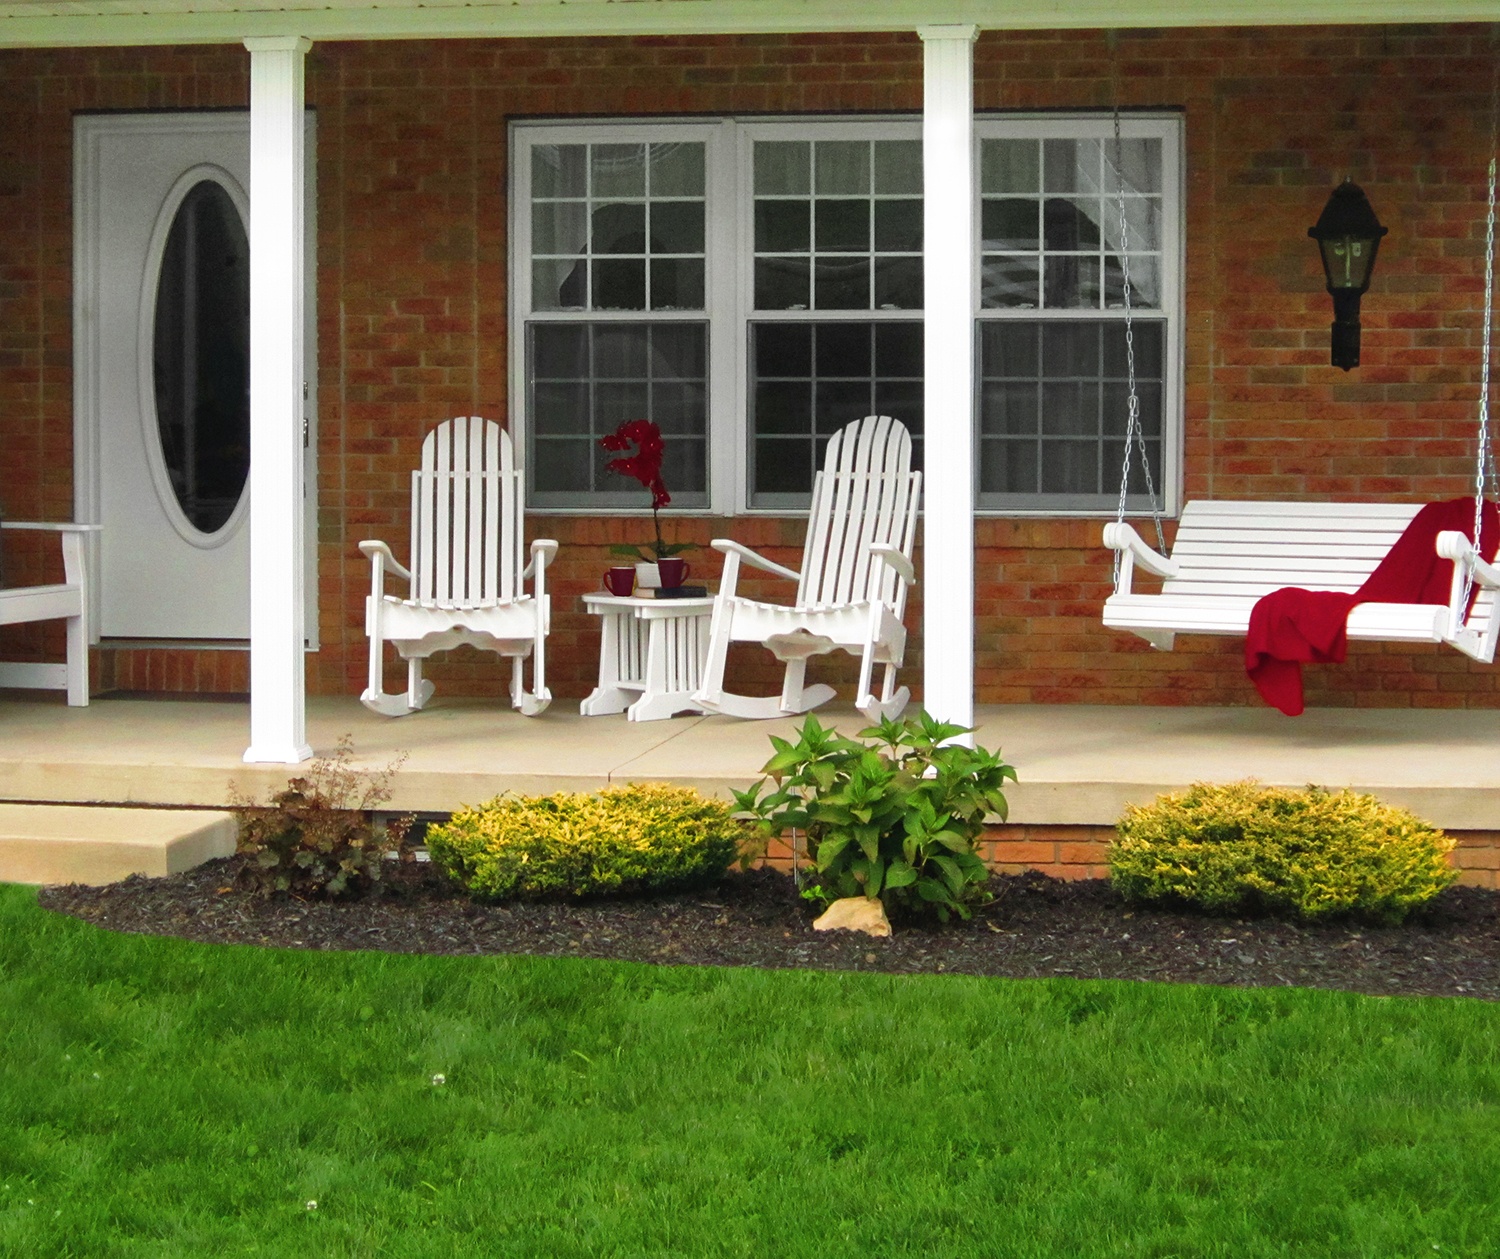 Porch and Patio Sets